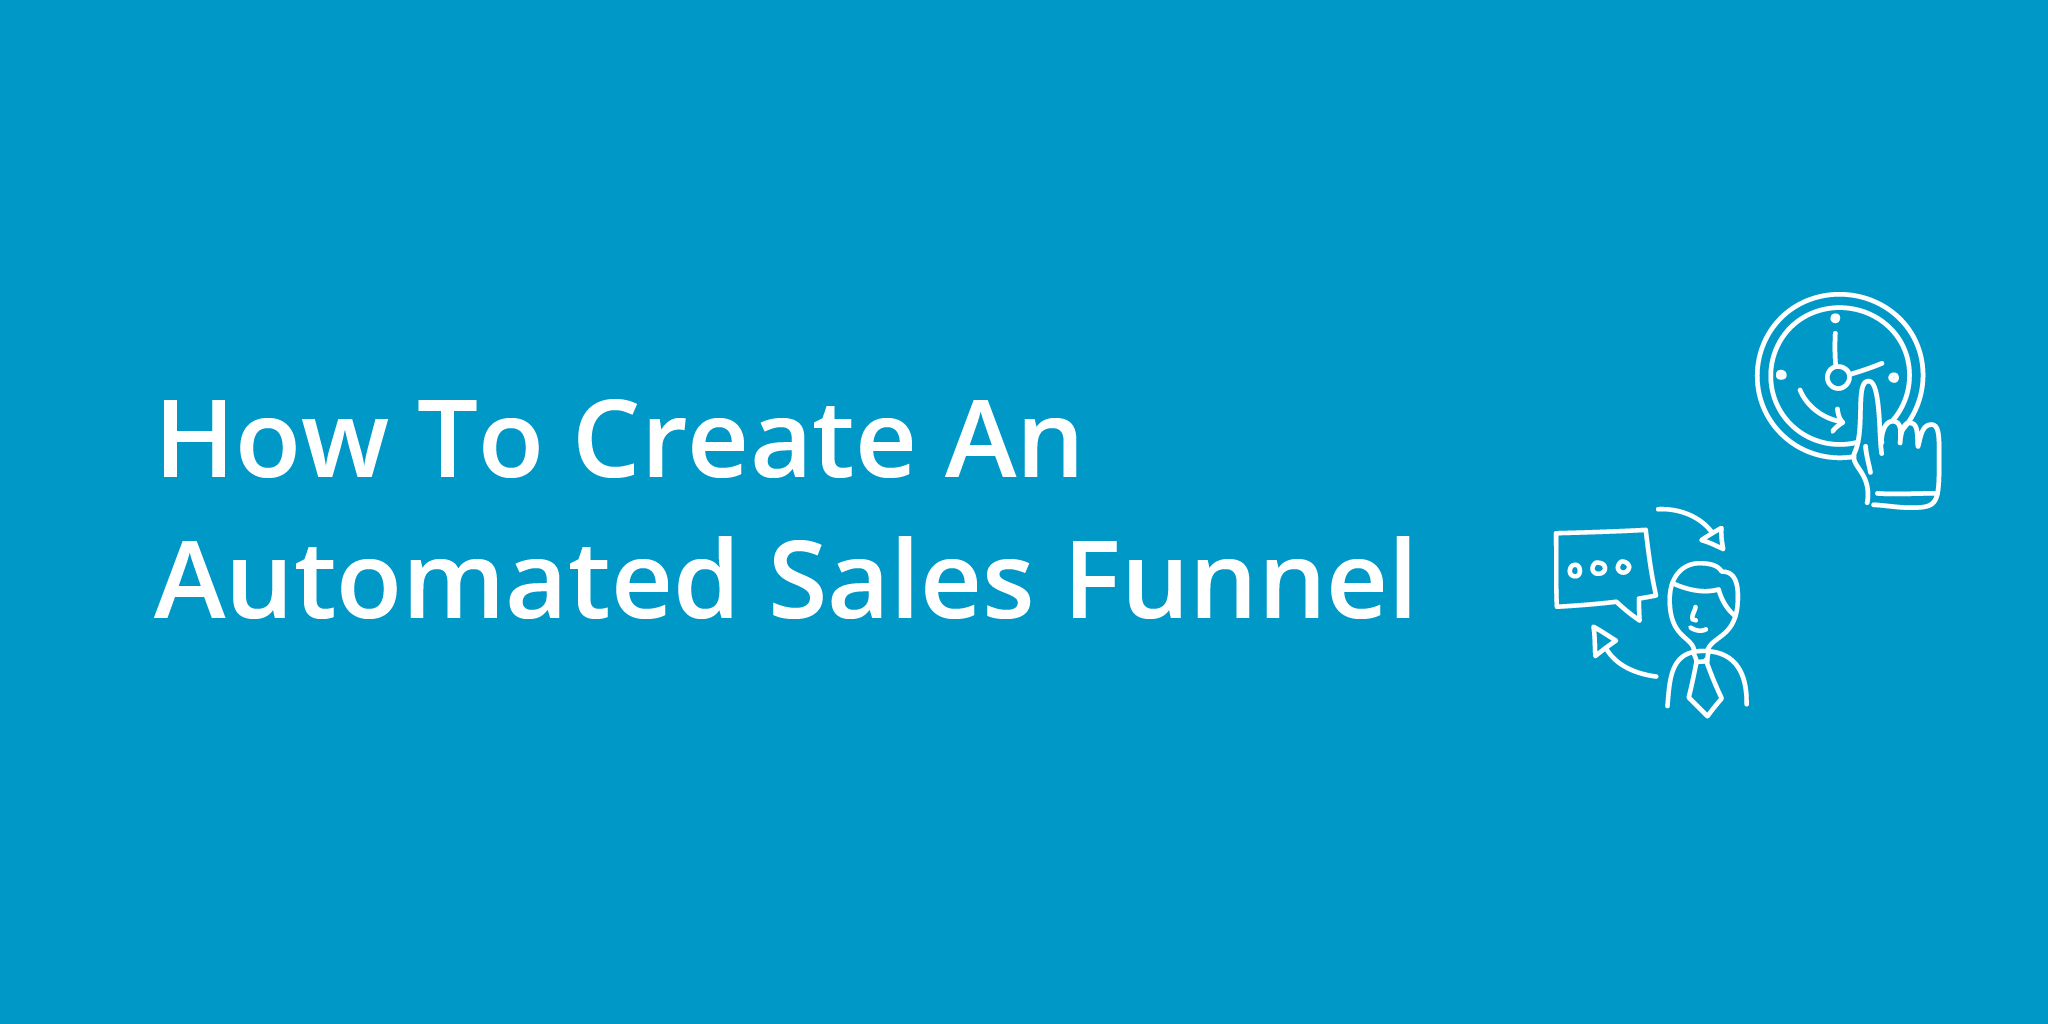 How To Create An Automated Sales Funnel | Telephones for business